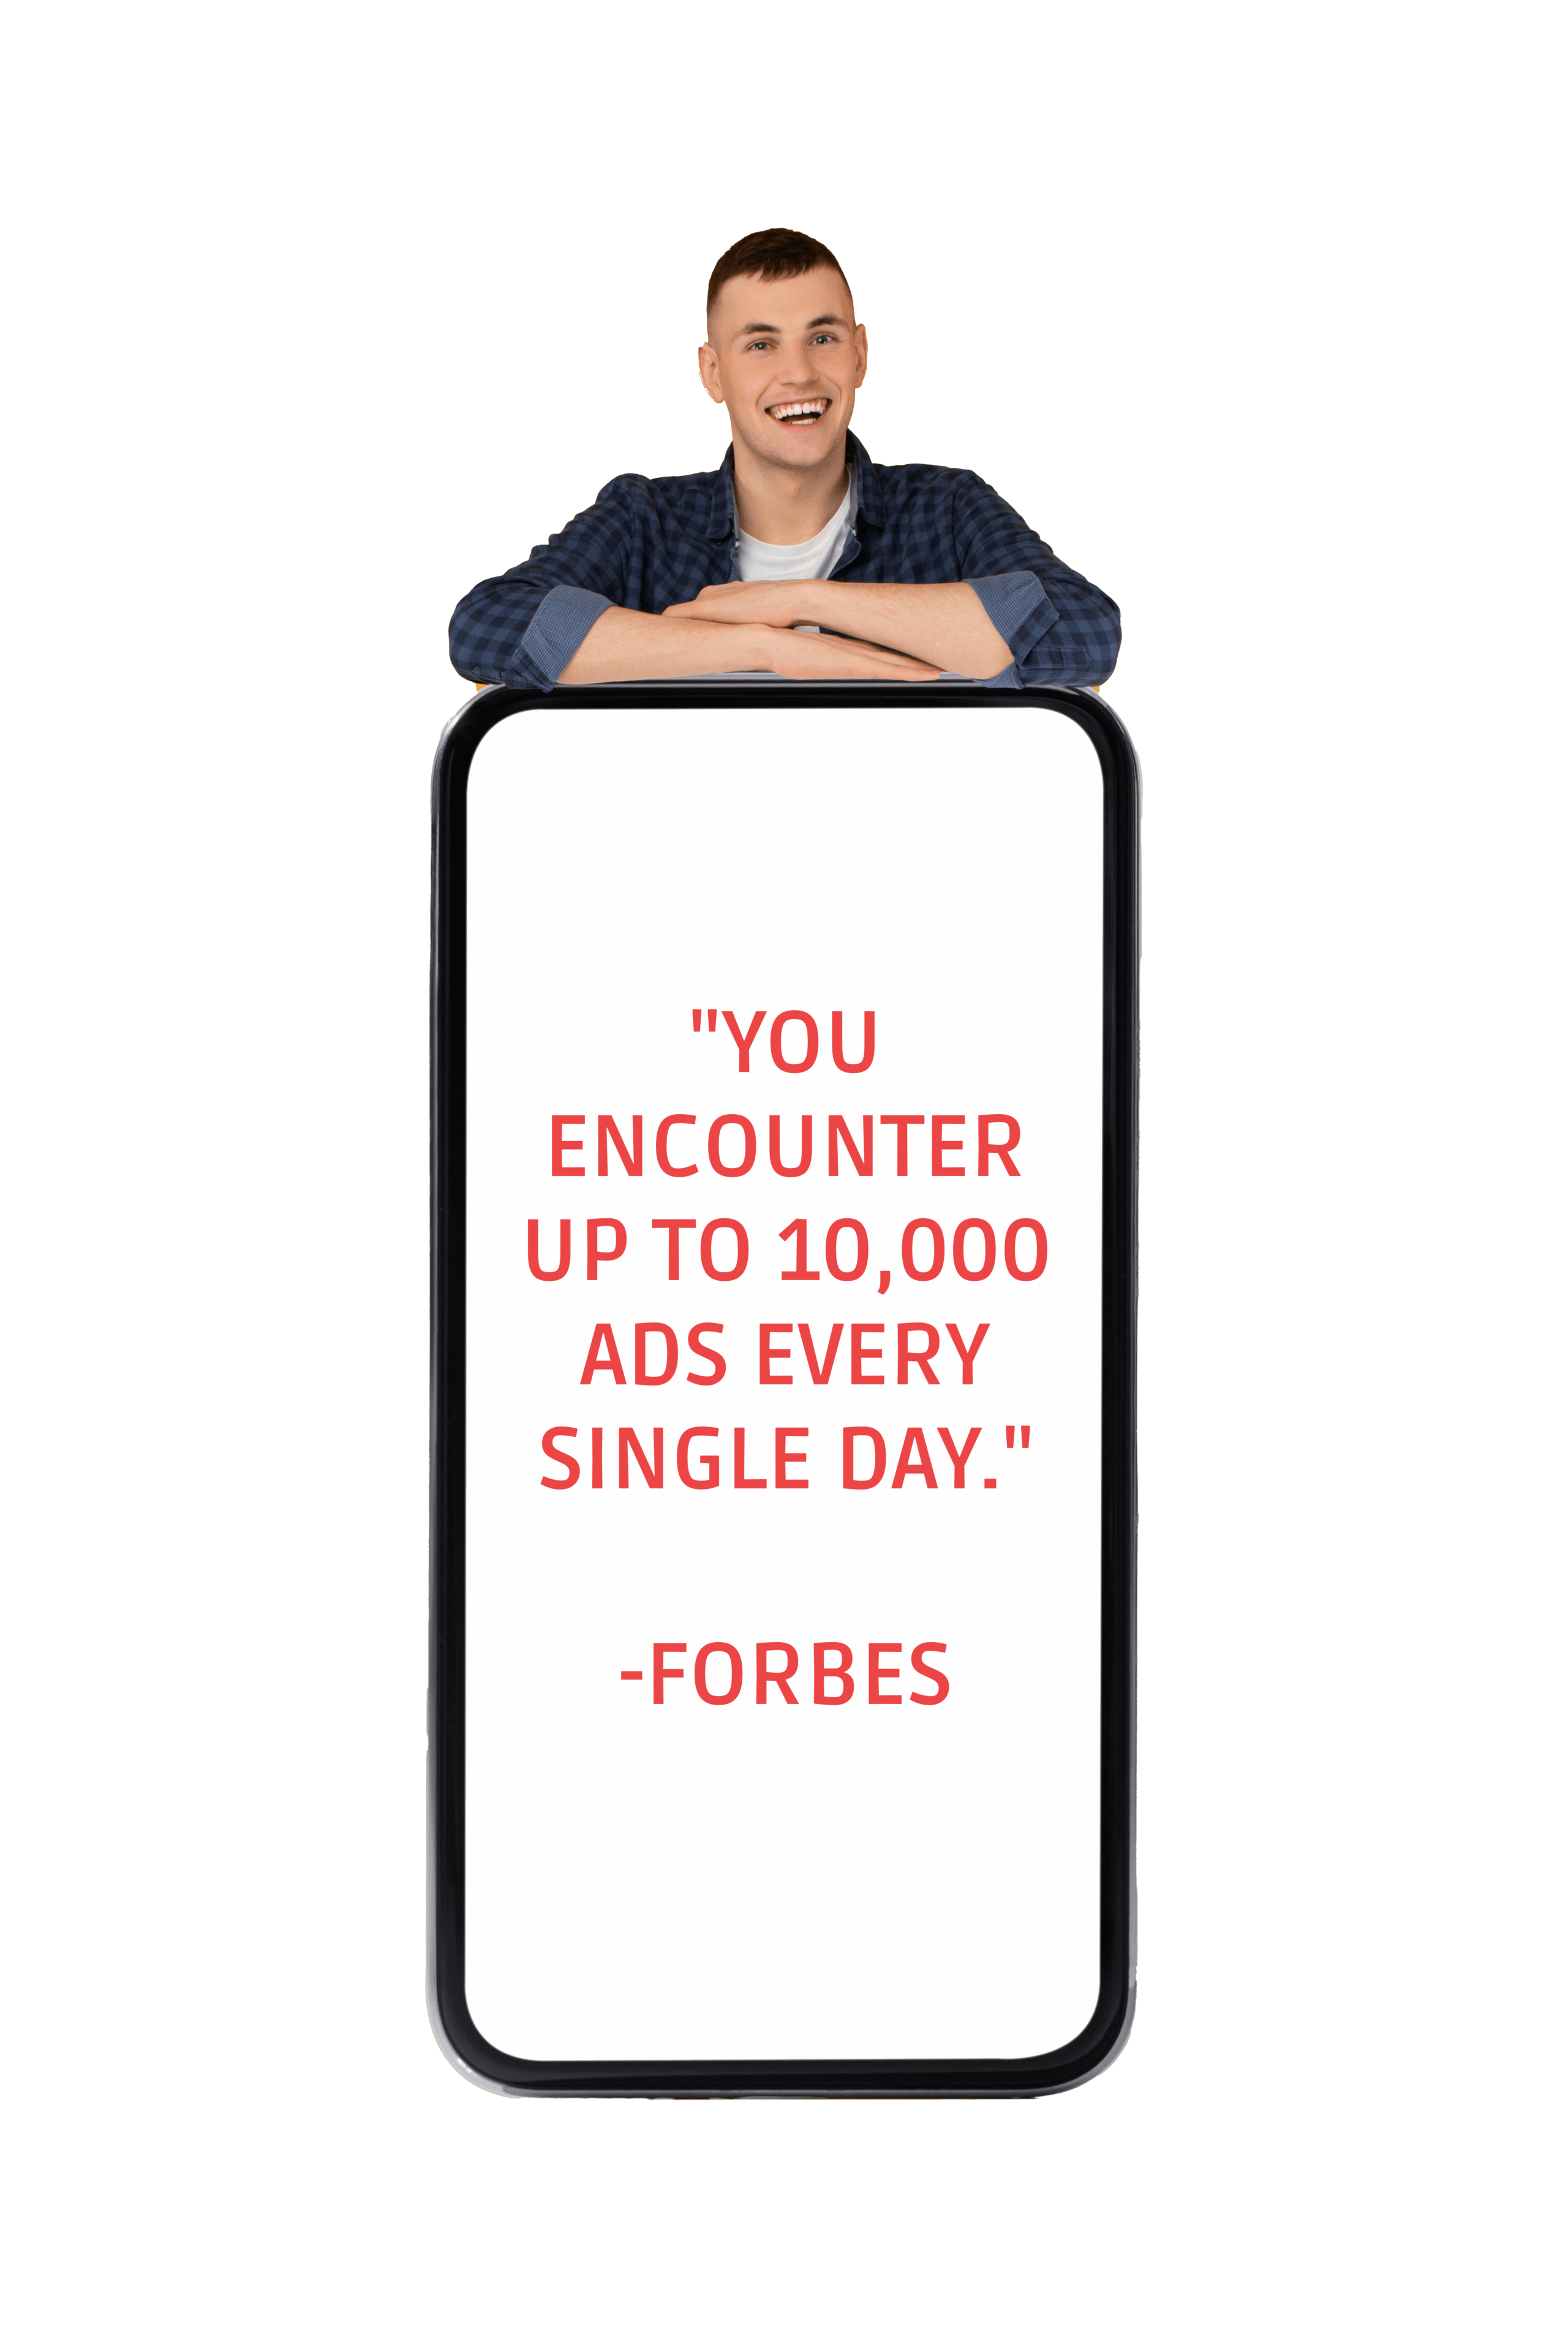 You encounter up to 10,000 ads every single day forbes fox marketing solutions